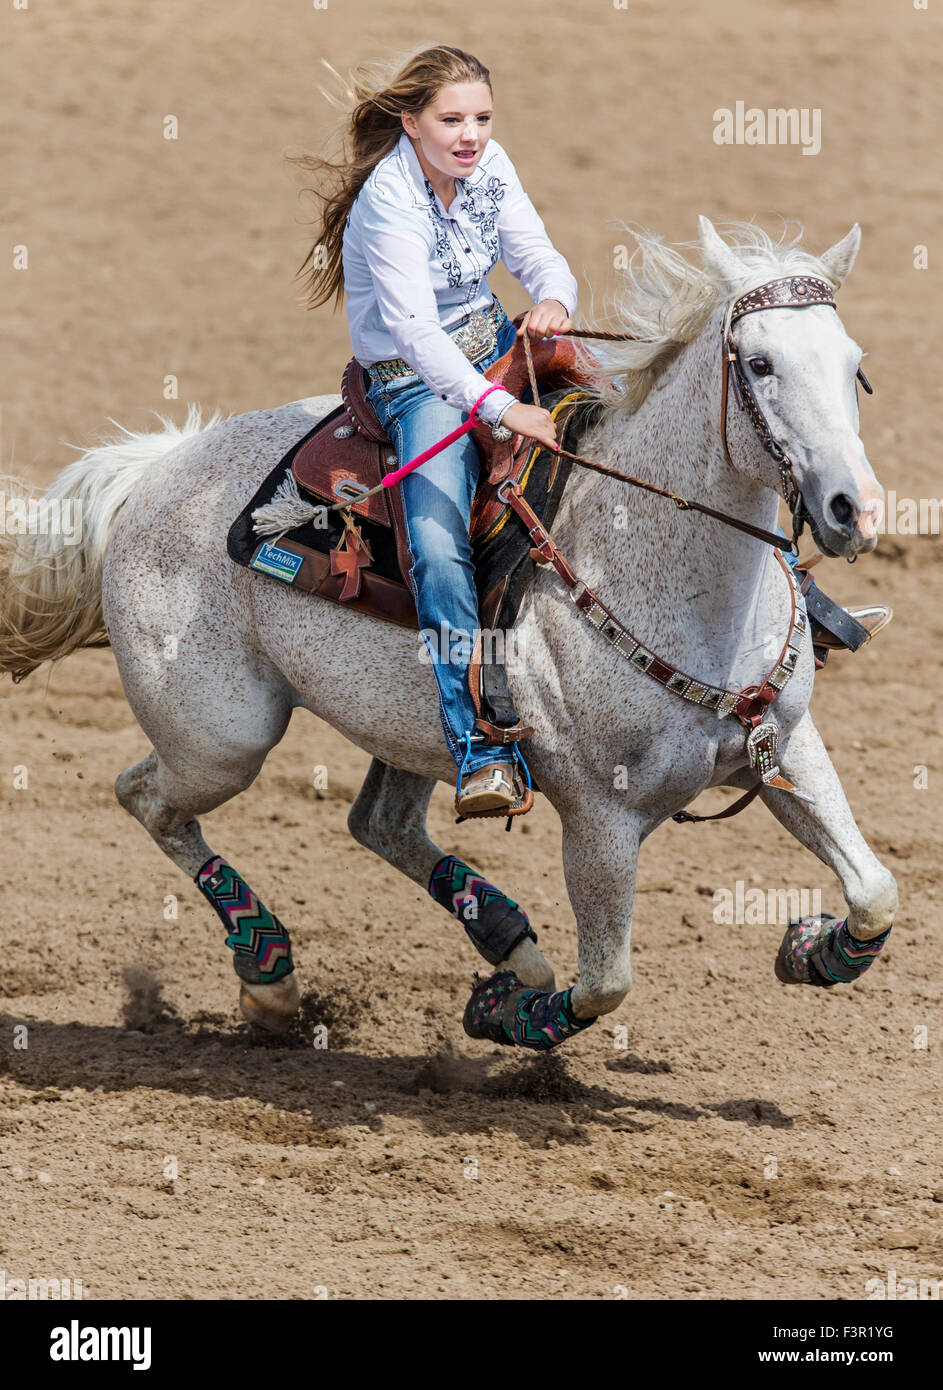 Rodeo cowgirl on horseback competing in barrel racing event, Chaffee County Fair & Rodeo, Salida, Colorado, USA Stock Photo